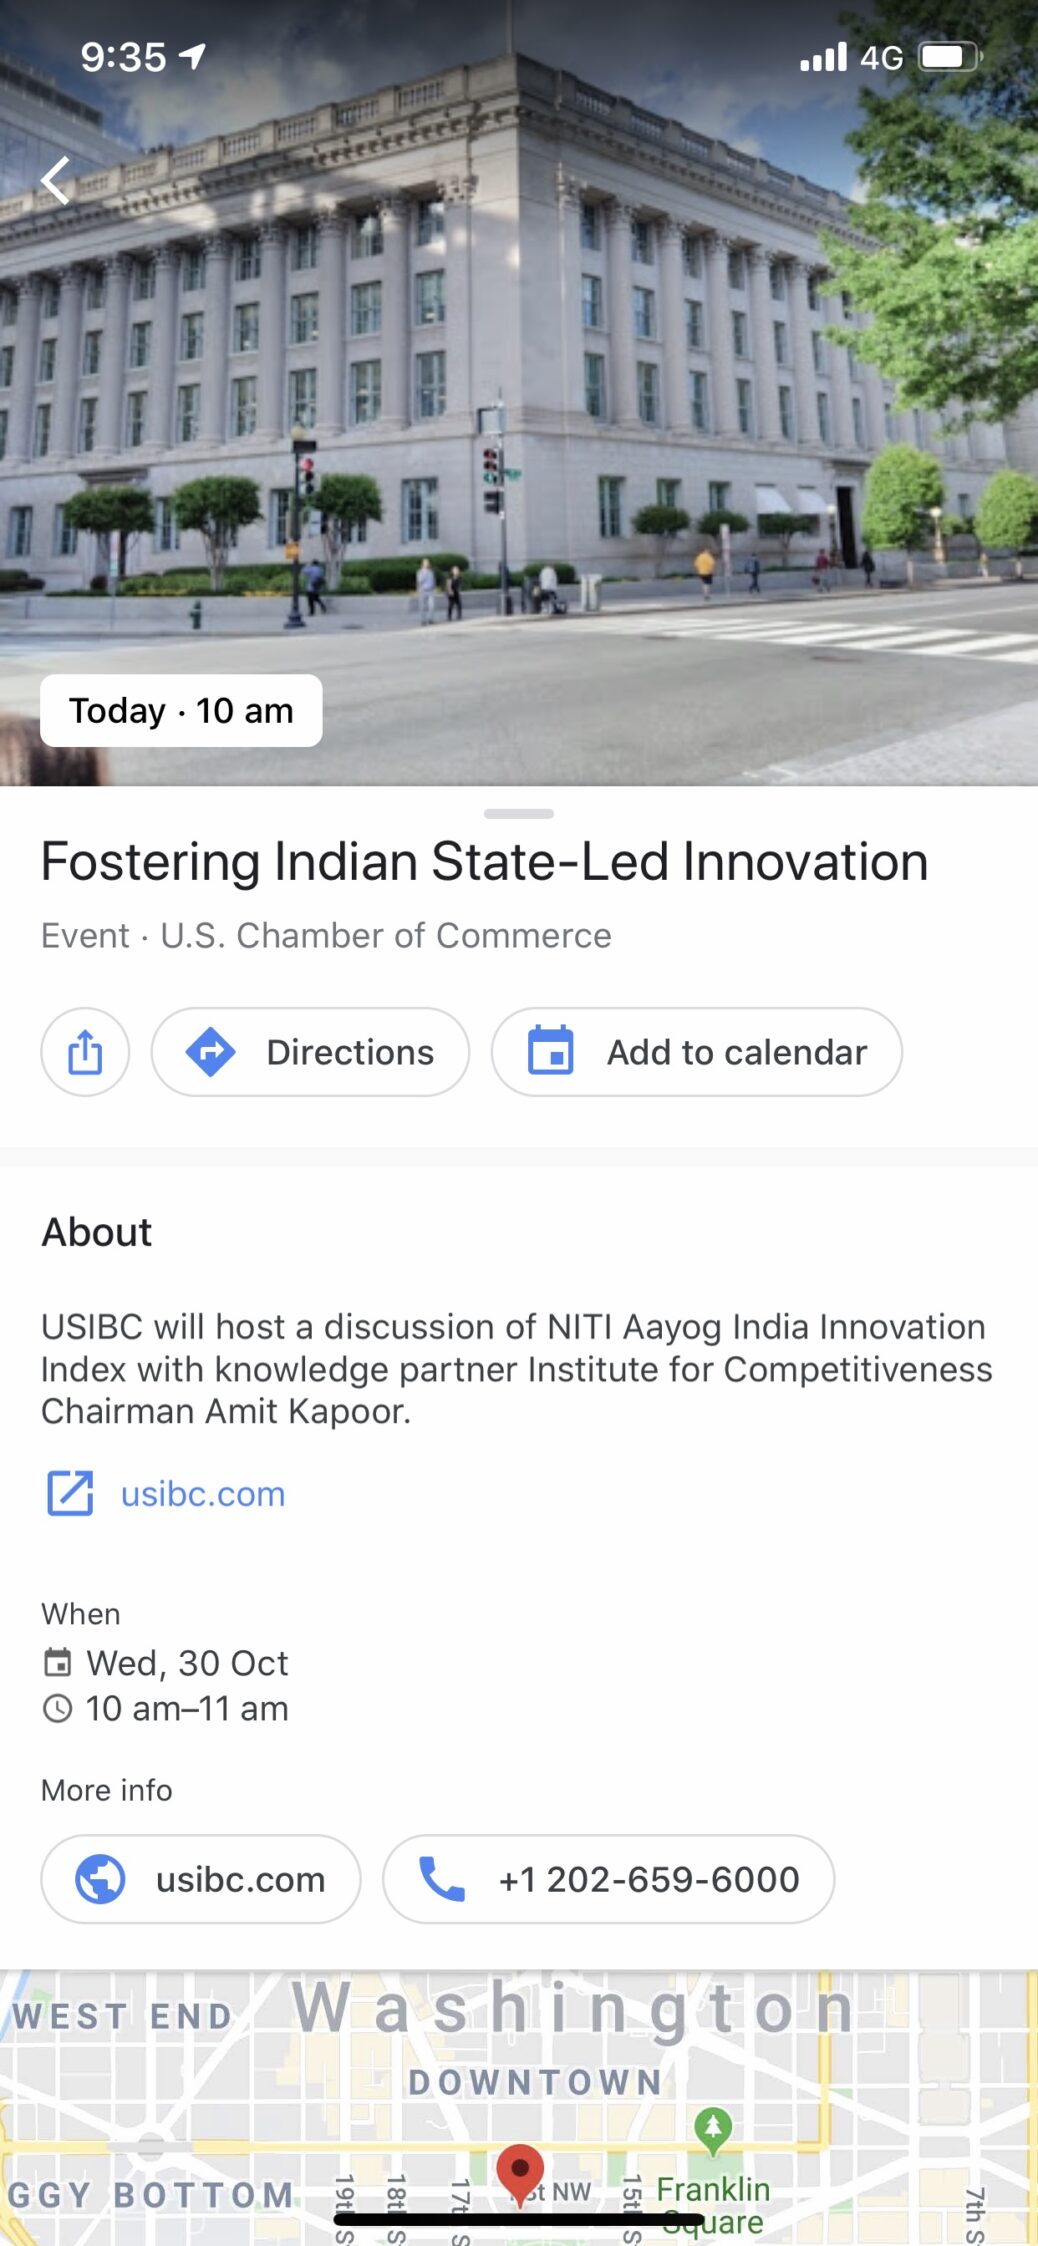 Fostering Indian State-Led Innovation